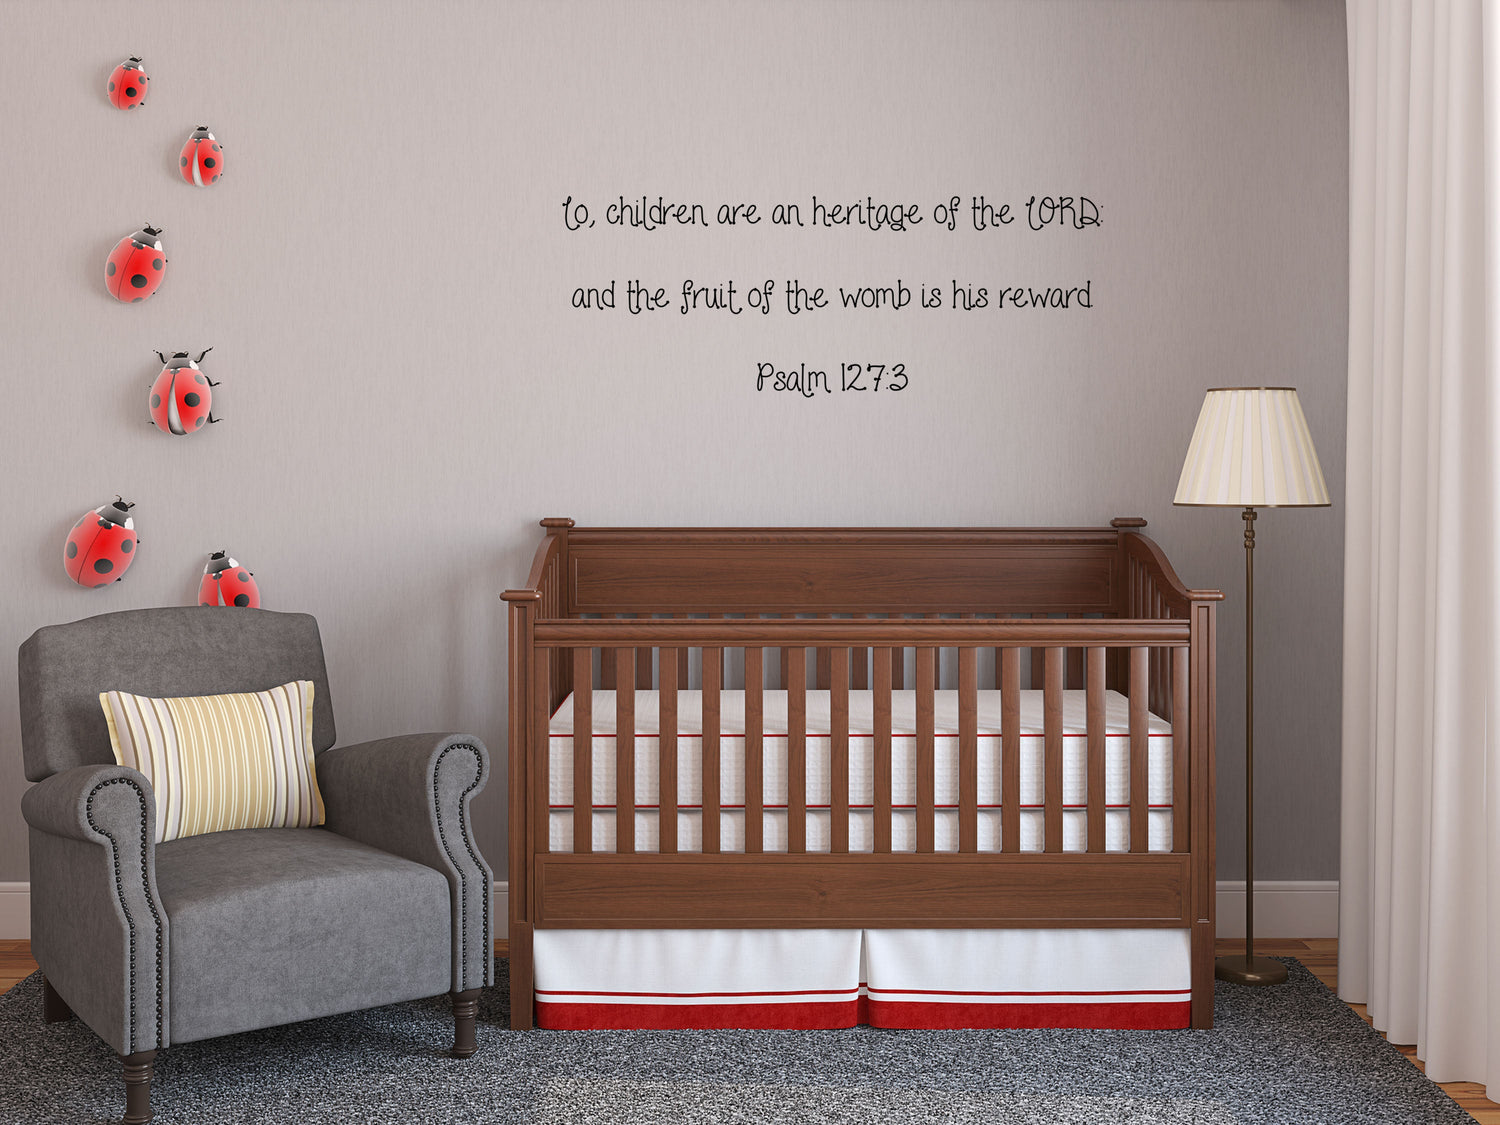 Psalm 127:3 Lo Children Are An Heritage Of The Lord - Scripture Wall Decals Vinyl Wall Decal Inspirational Wall Signs 